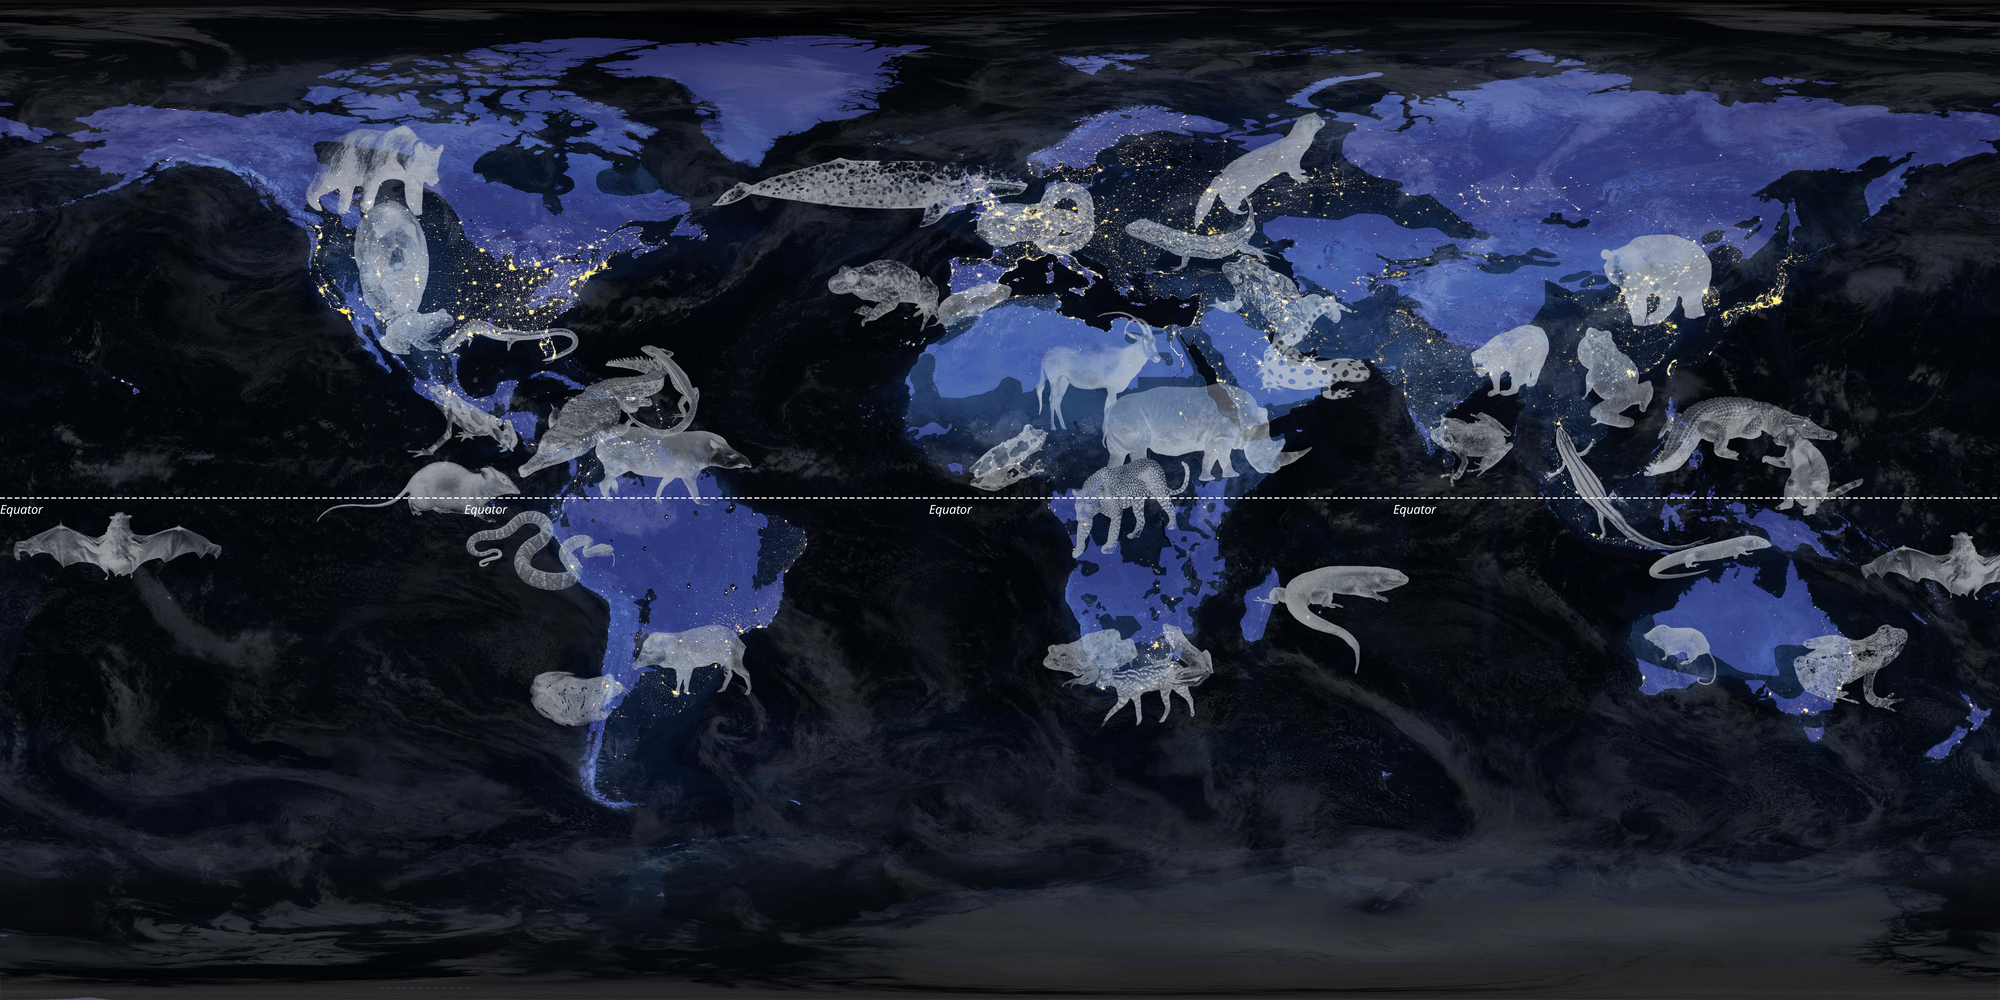 Map of the globe showing the images of extinct animals hovering over the places they once existed